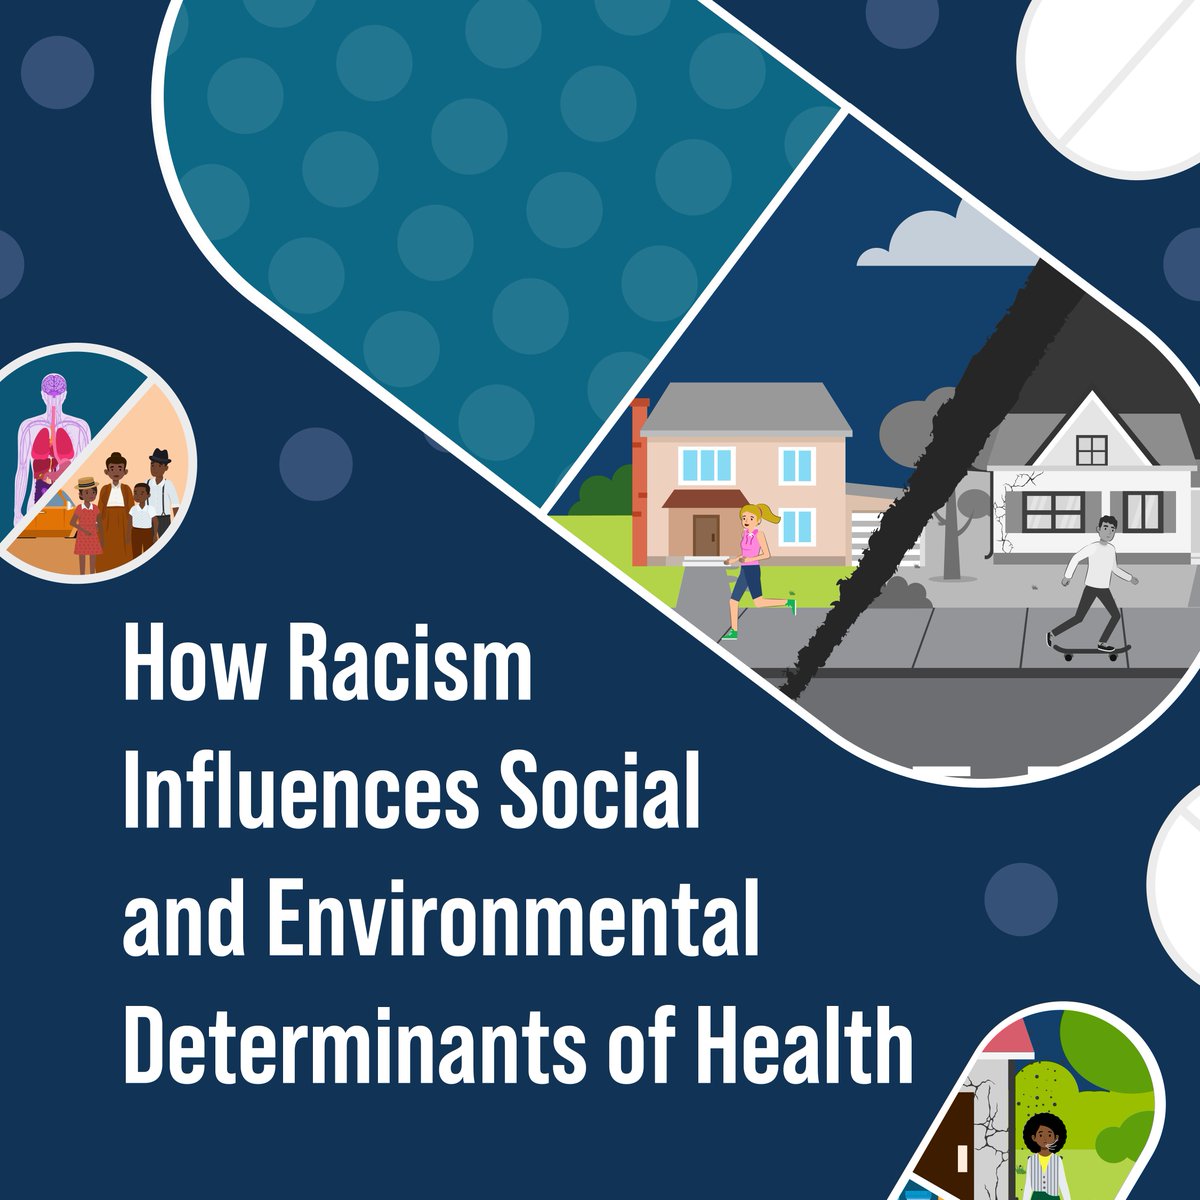 Explore case studies that reveal how systemic racism continues to hinder some communities from accessing positive social and environmental determinants of health and how this, in turn, results in racial health disparities. Learn more: ow.ly/SfBa50RuQm3 #STEMForAll